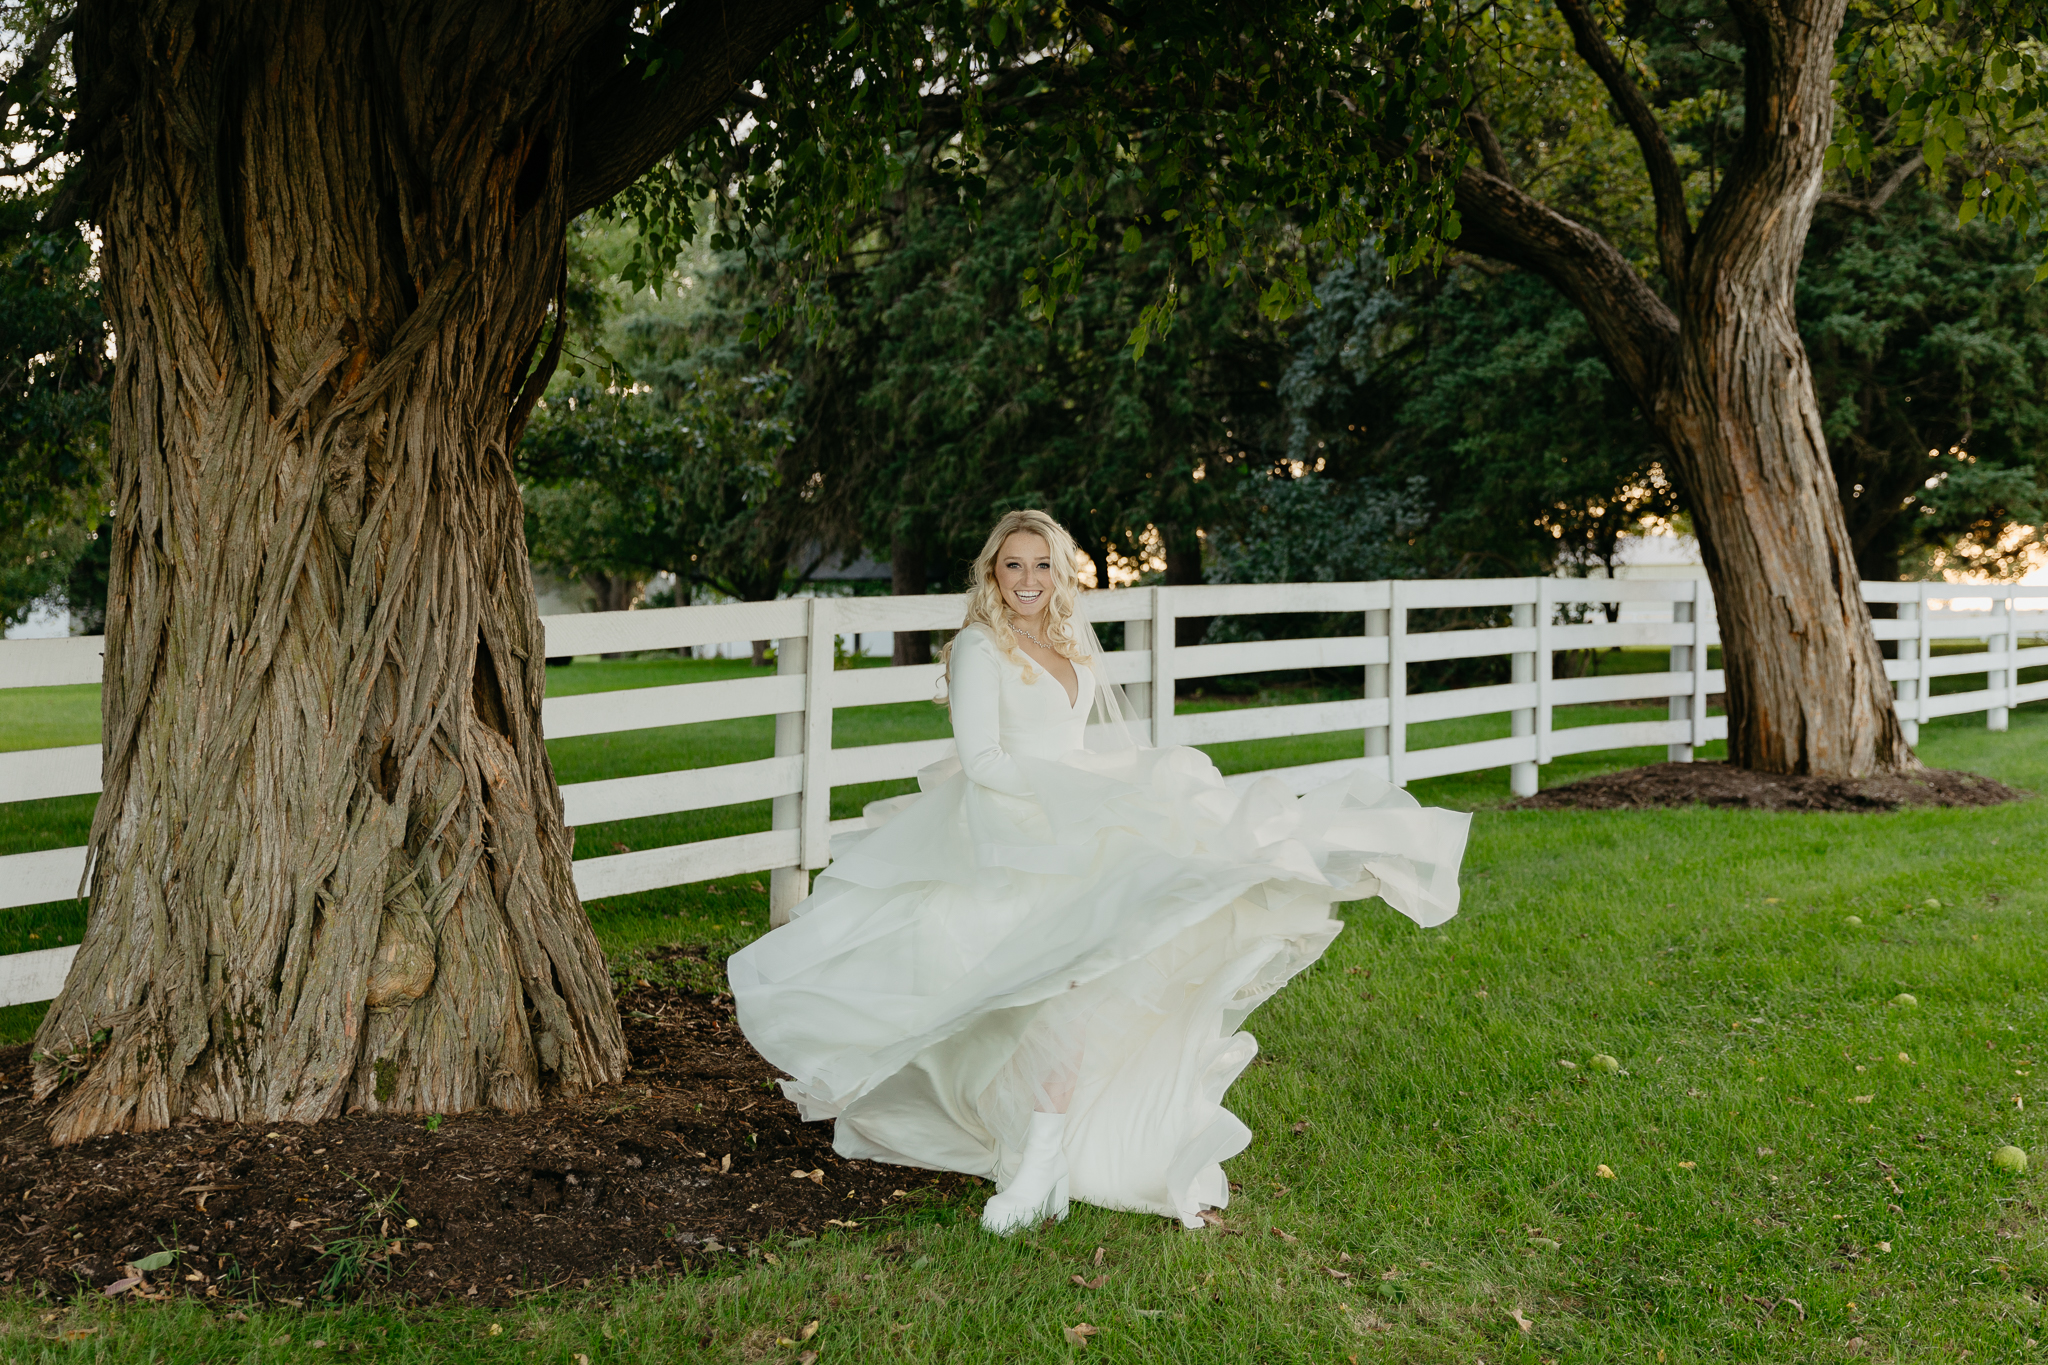 Bride twirls dress with white boots and laughs, underneath a large tree and next to a horse pasture